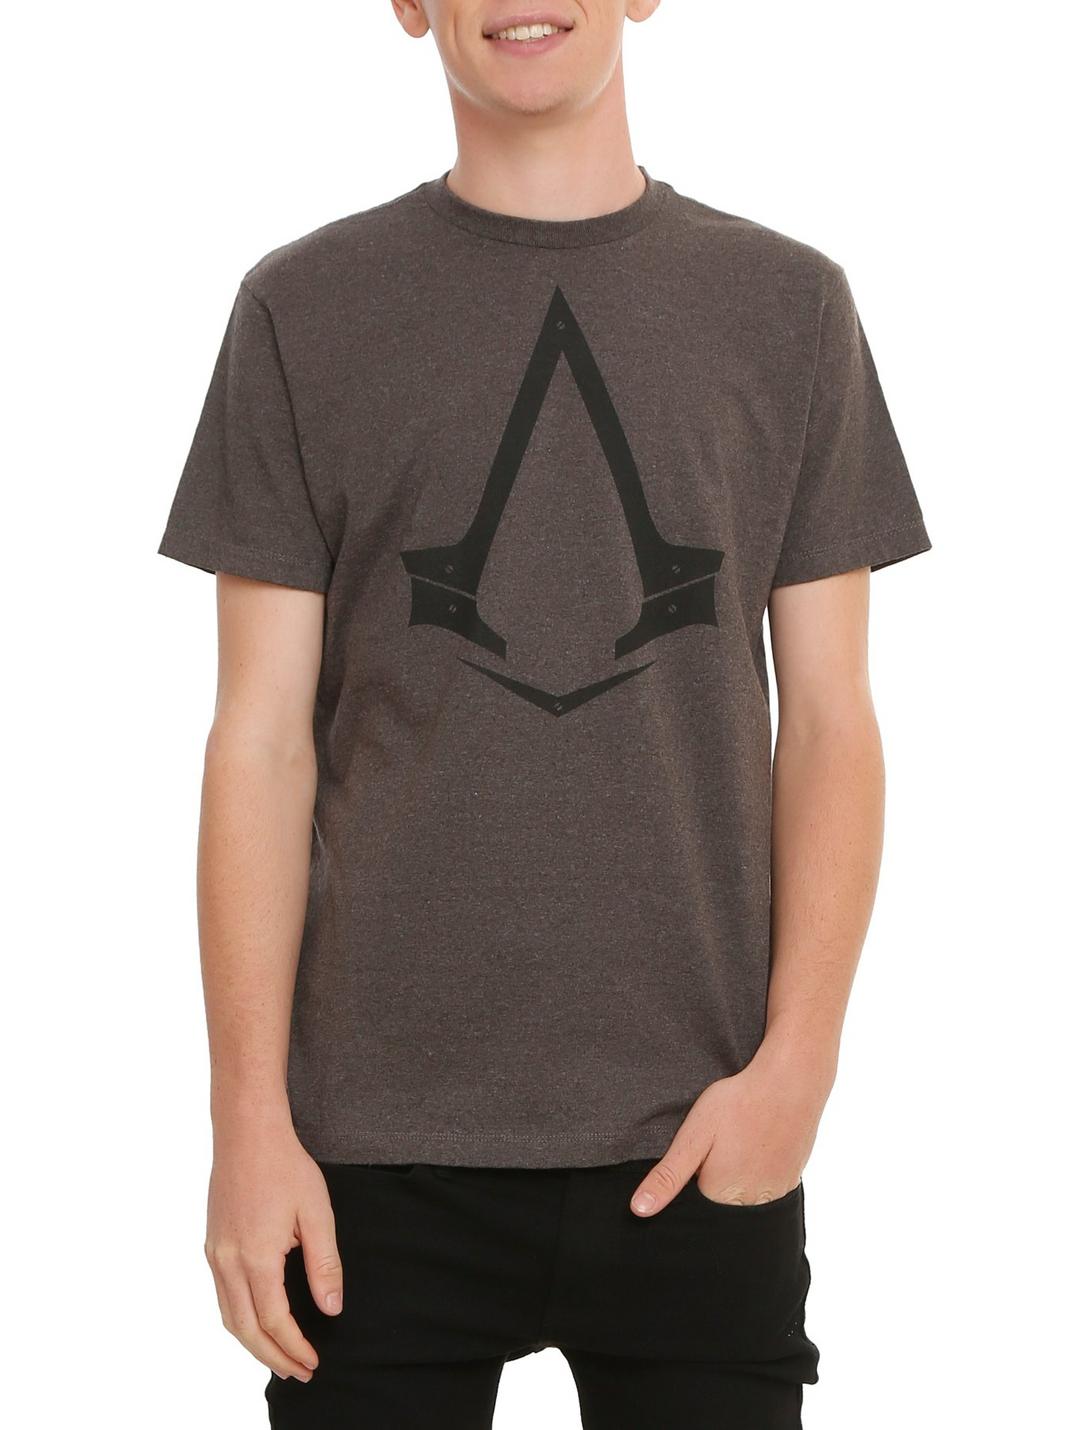 Assassin's Creed Syndicate Logo T-Shirt, CHARCOAL, hi-res